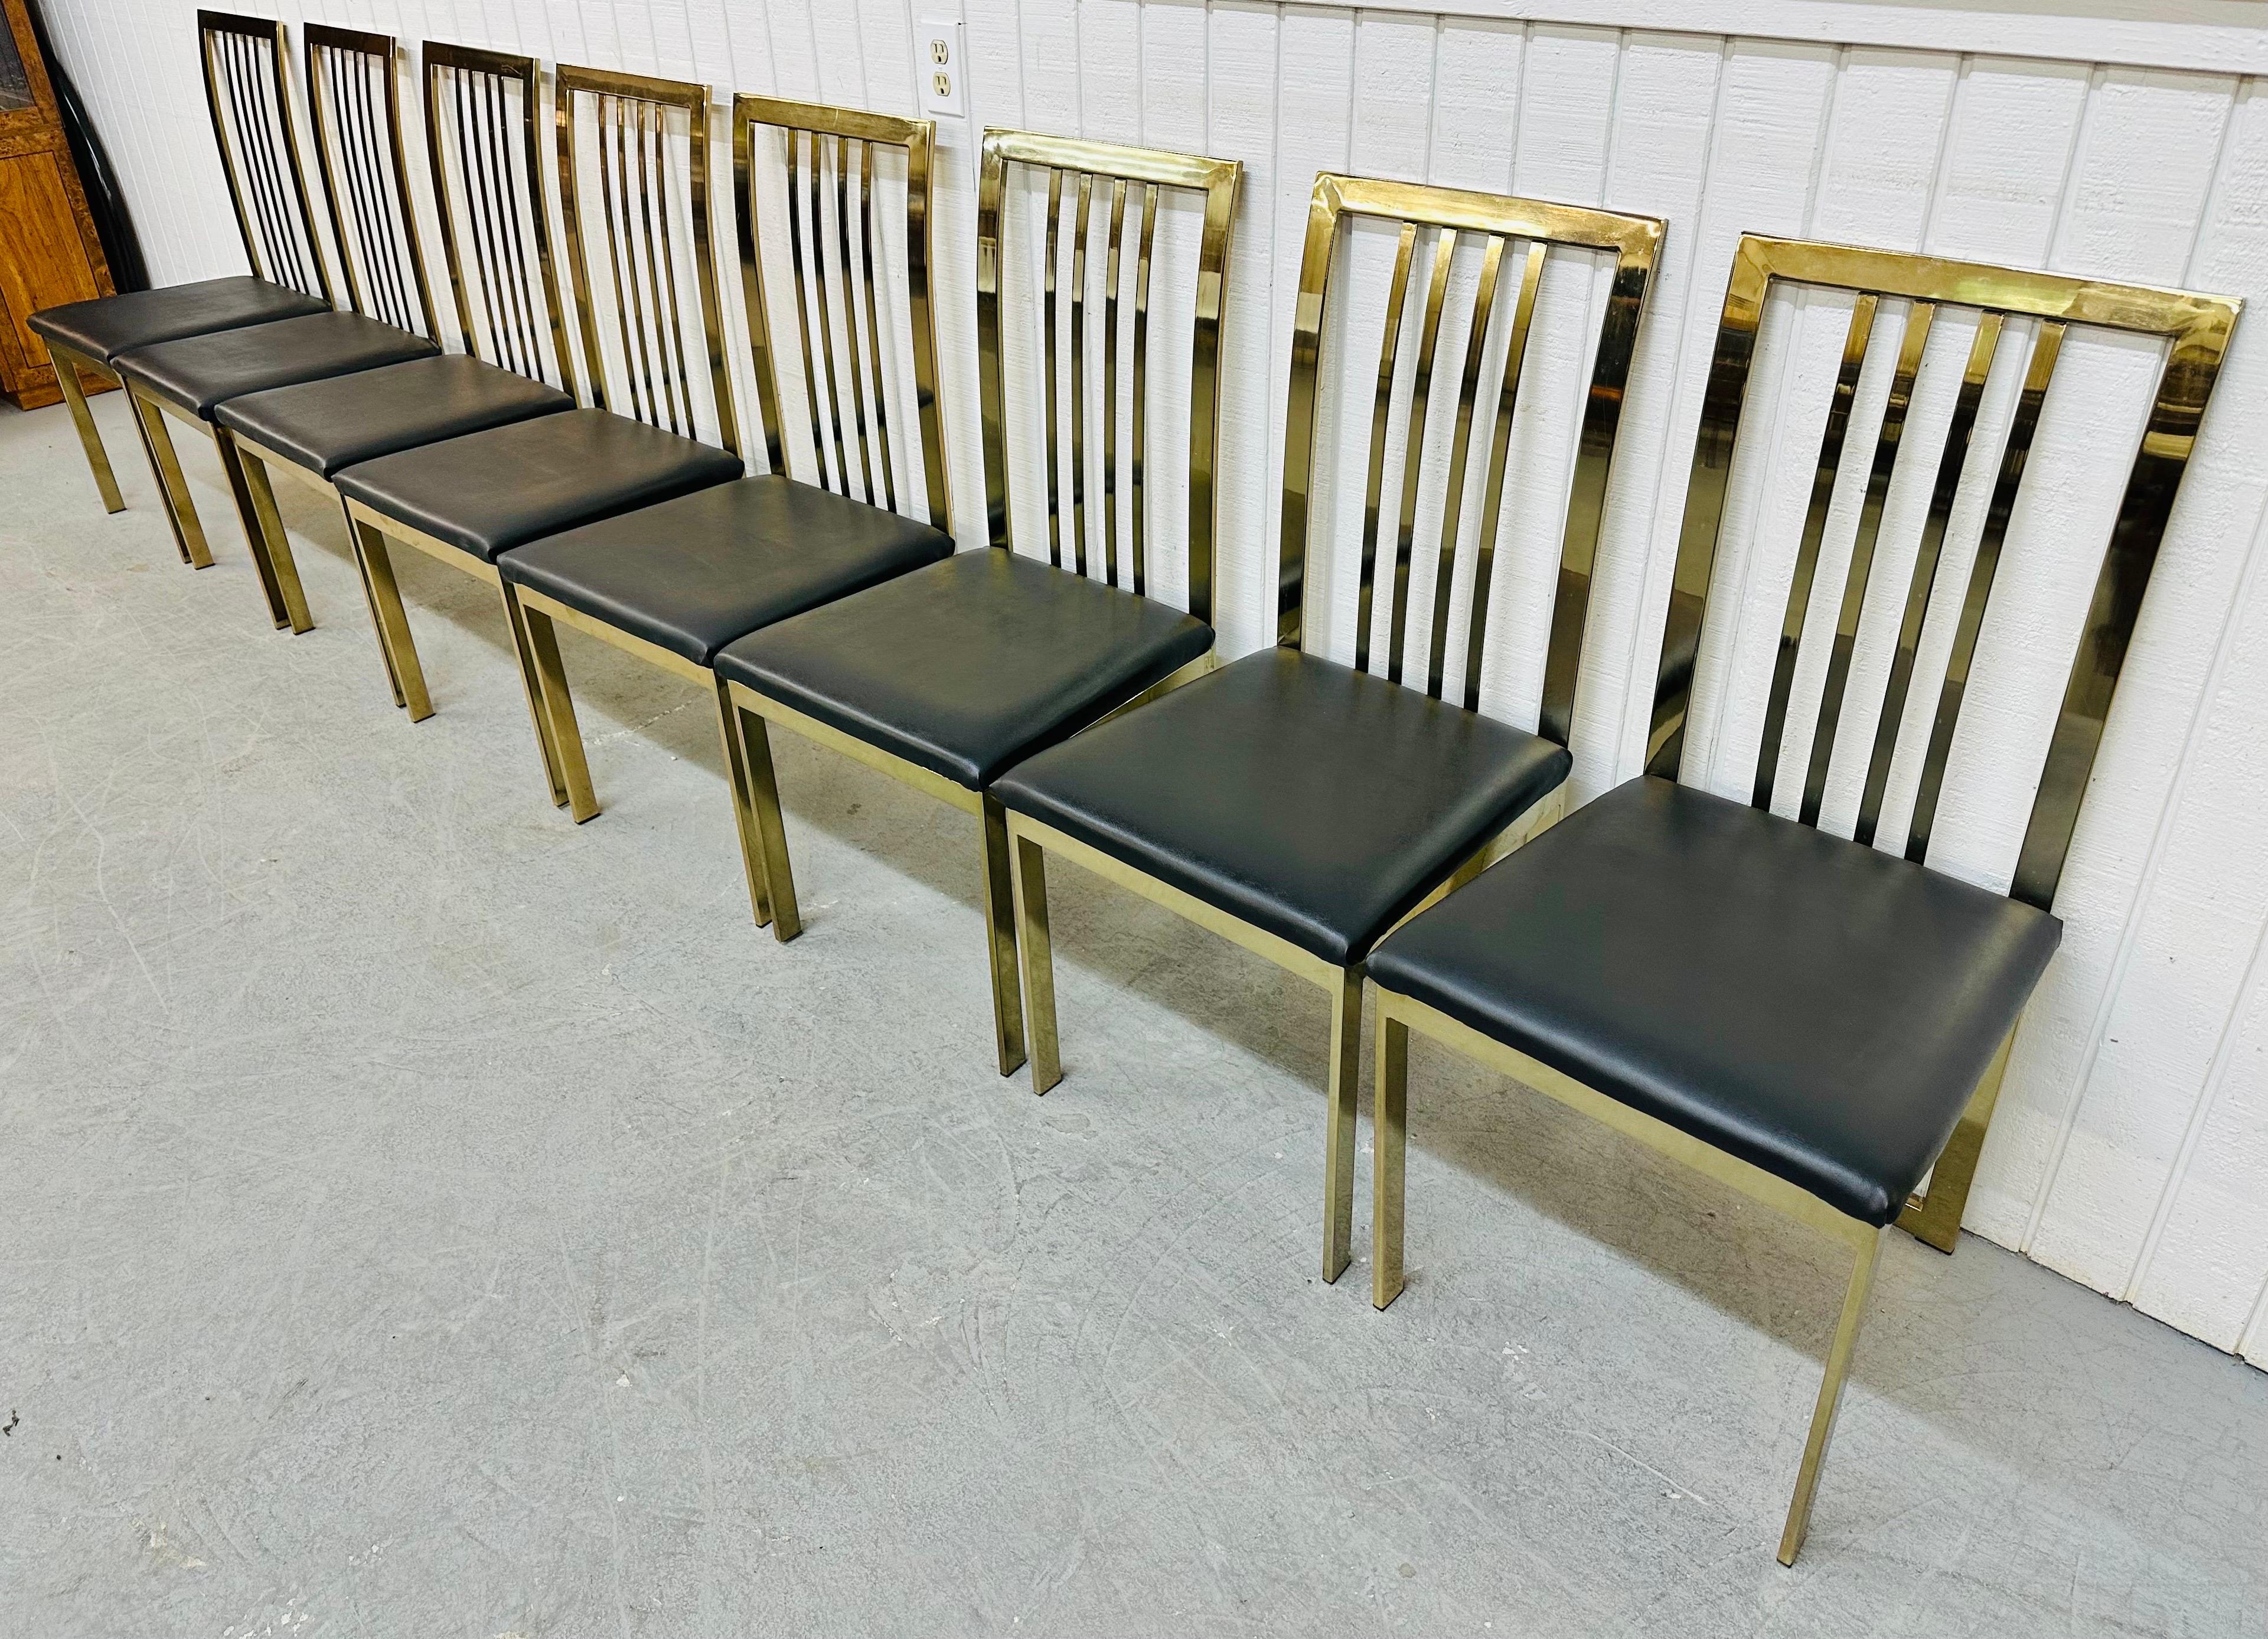 This listing is for a set of eight vintage Milo Baughman Style Flat Bar Brass Dining Chairs. Featuring eight straight chairs, brass frames, and new black vinyl upholstery. This is an exceptional combination of quality and design!